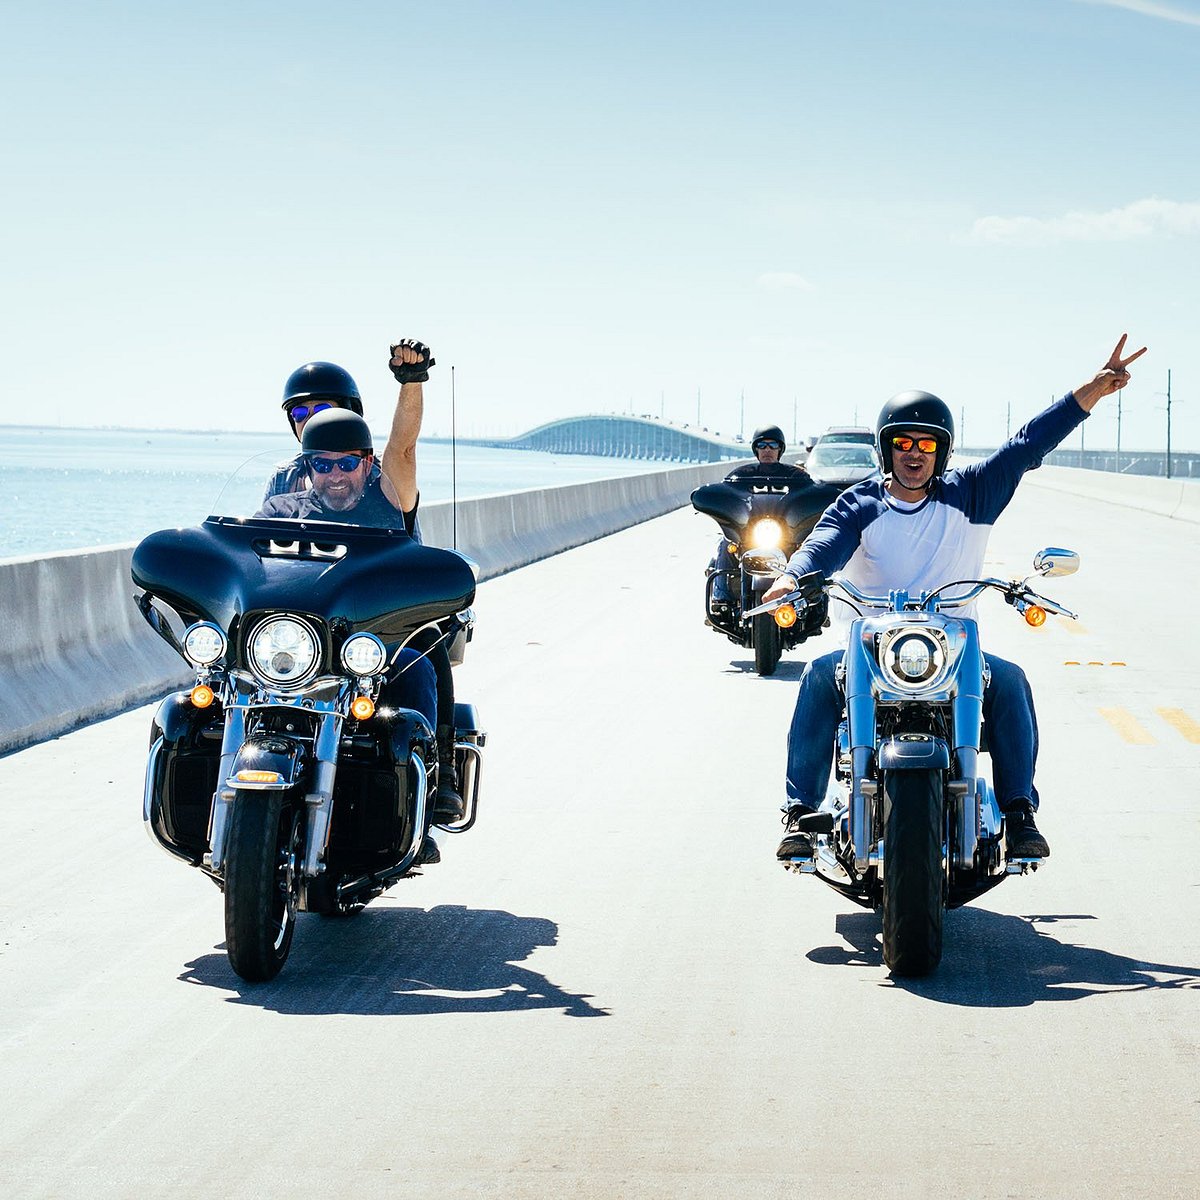 EAGLERIDER MOTORCYCLE RENTALS (Los Angeles) - All You Need to Know